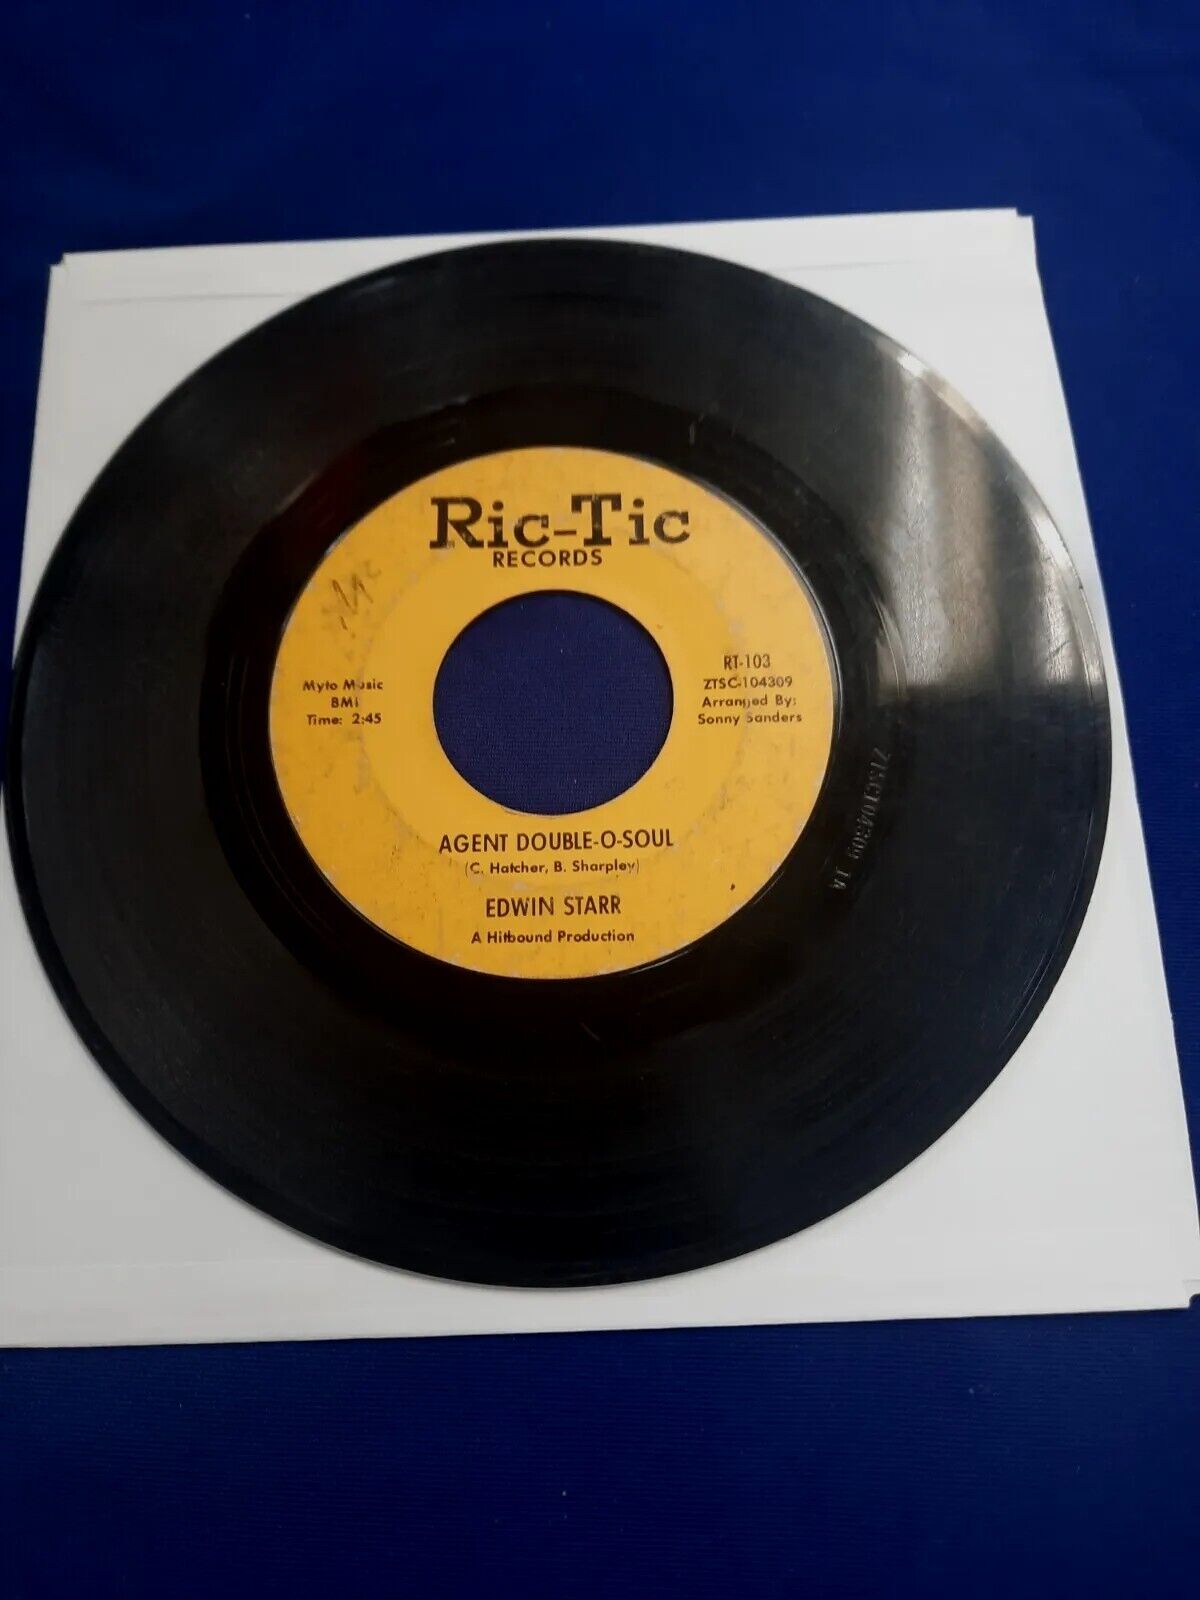 Edwin Starr  45  Agent Double-O-Soul  Single  Ric-Tic Records 1965 RT-103 VG 